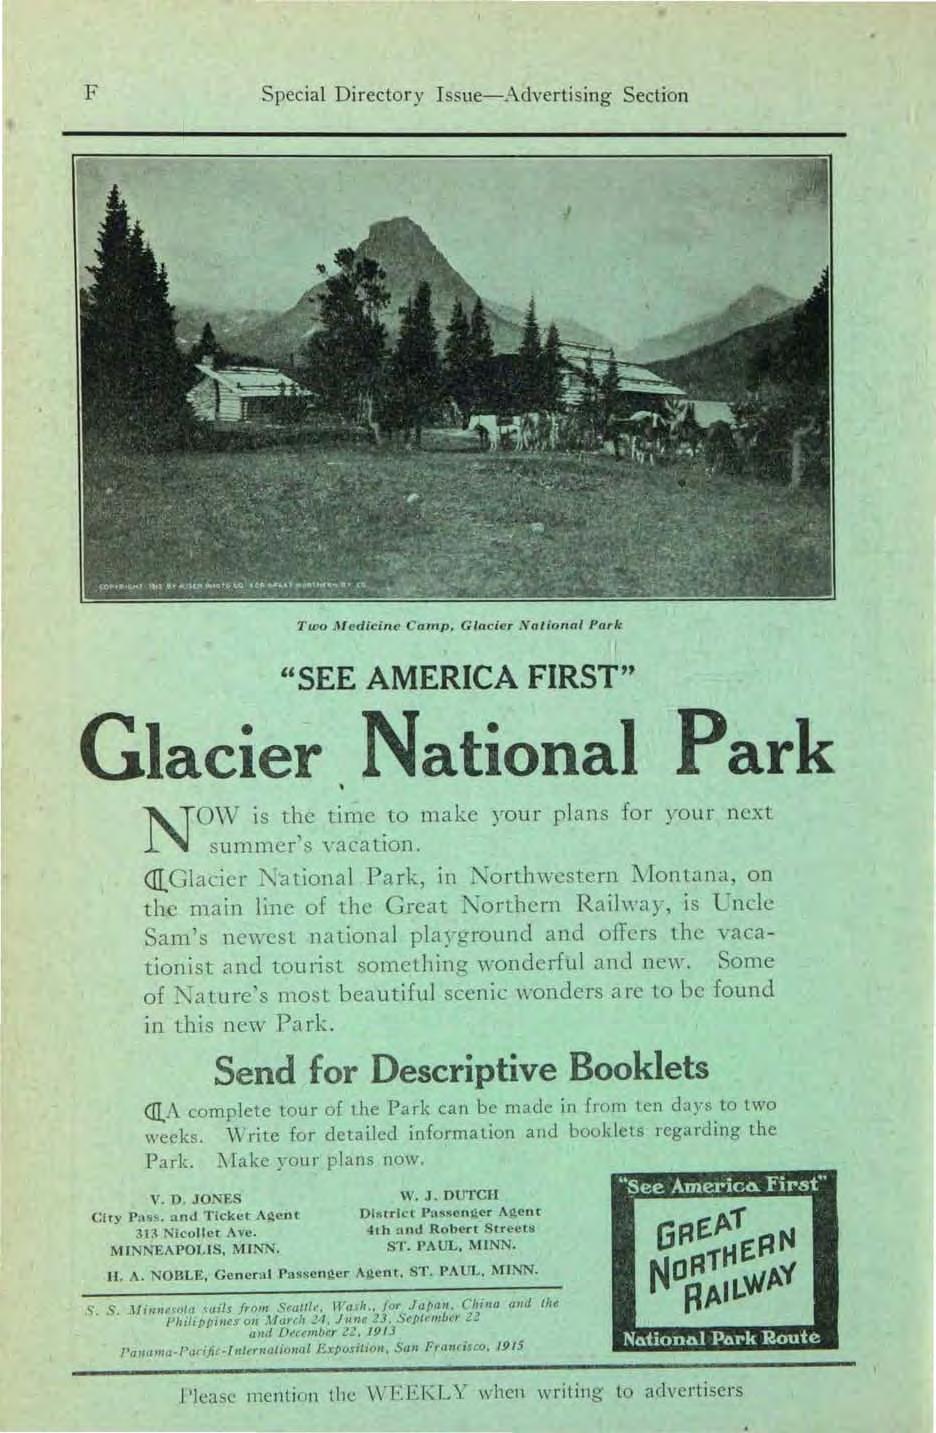 F Special Directory Issue-Advertising Section Two lu edicine CaTnp~ Glacier N ational Park I "SEE AMERICA FIRST" Glacier National Park N OVY is t l~e time.